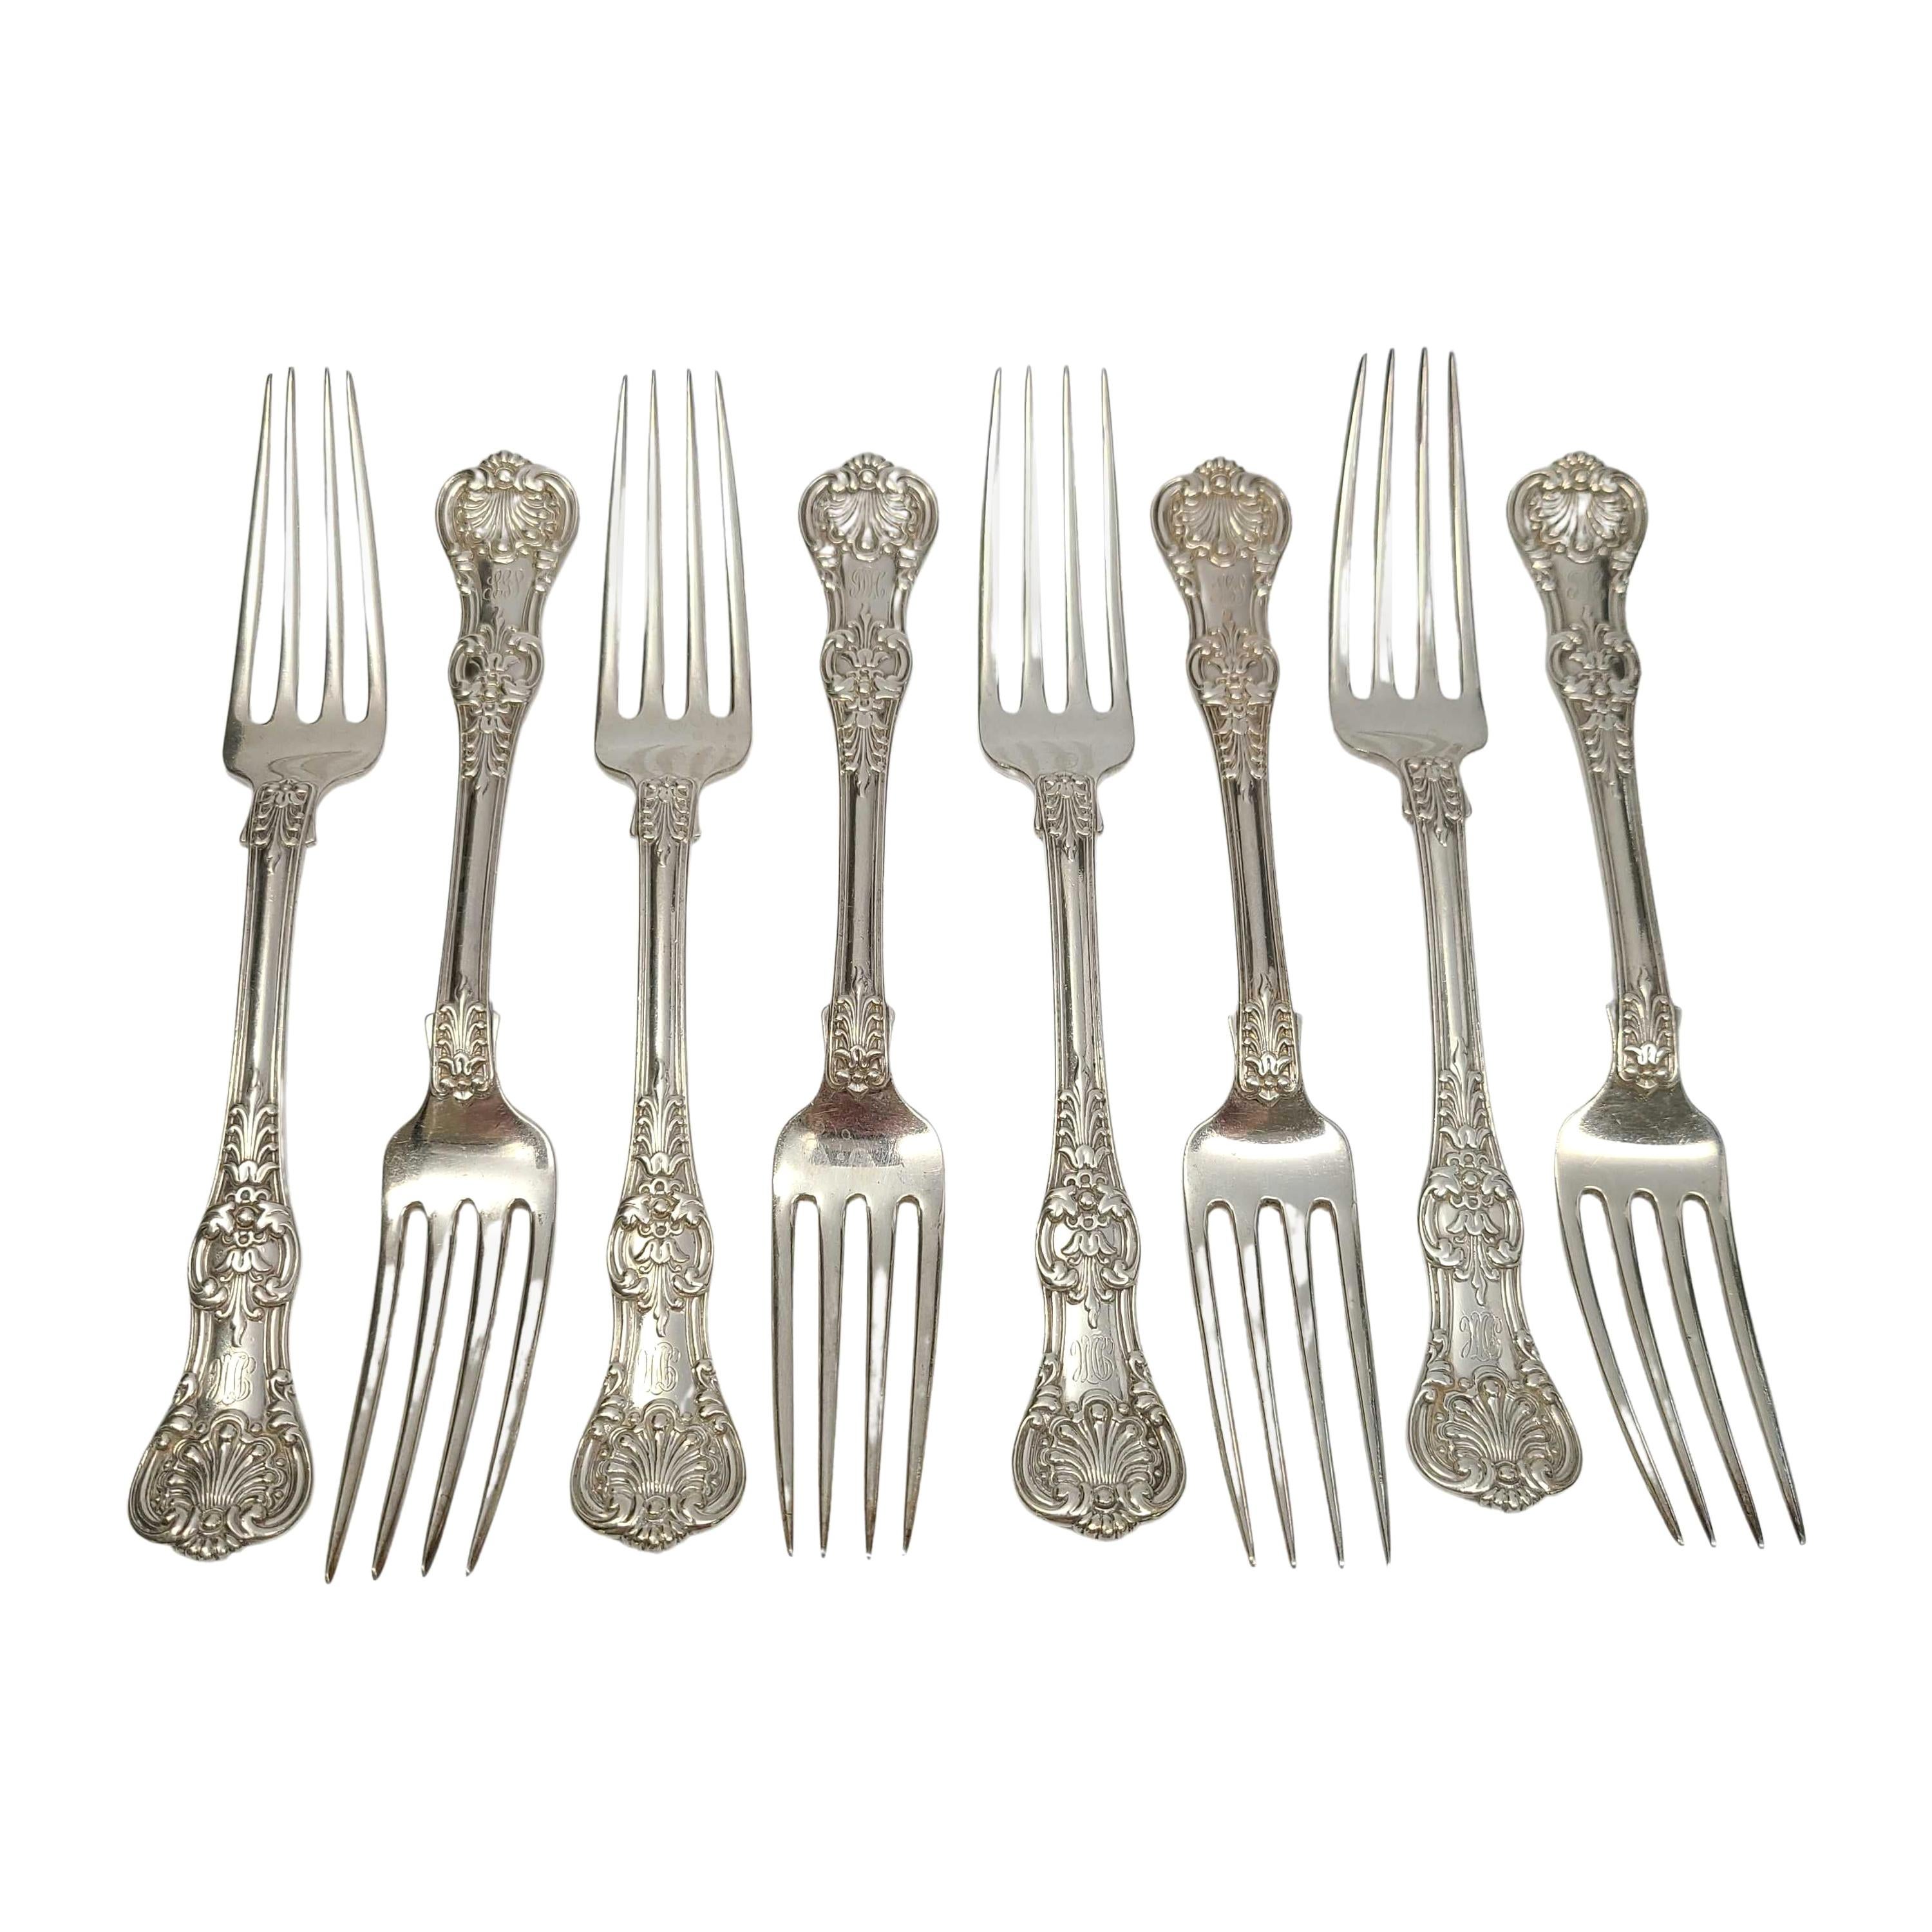 Set of 8 Tiffany & Co Sterling Silver English King Forks with Monogram